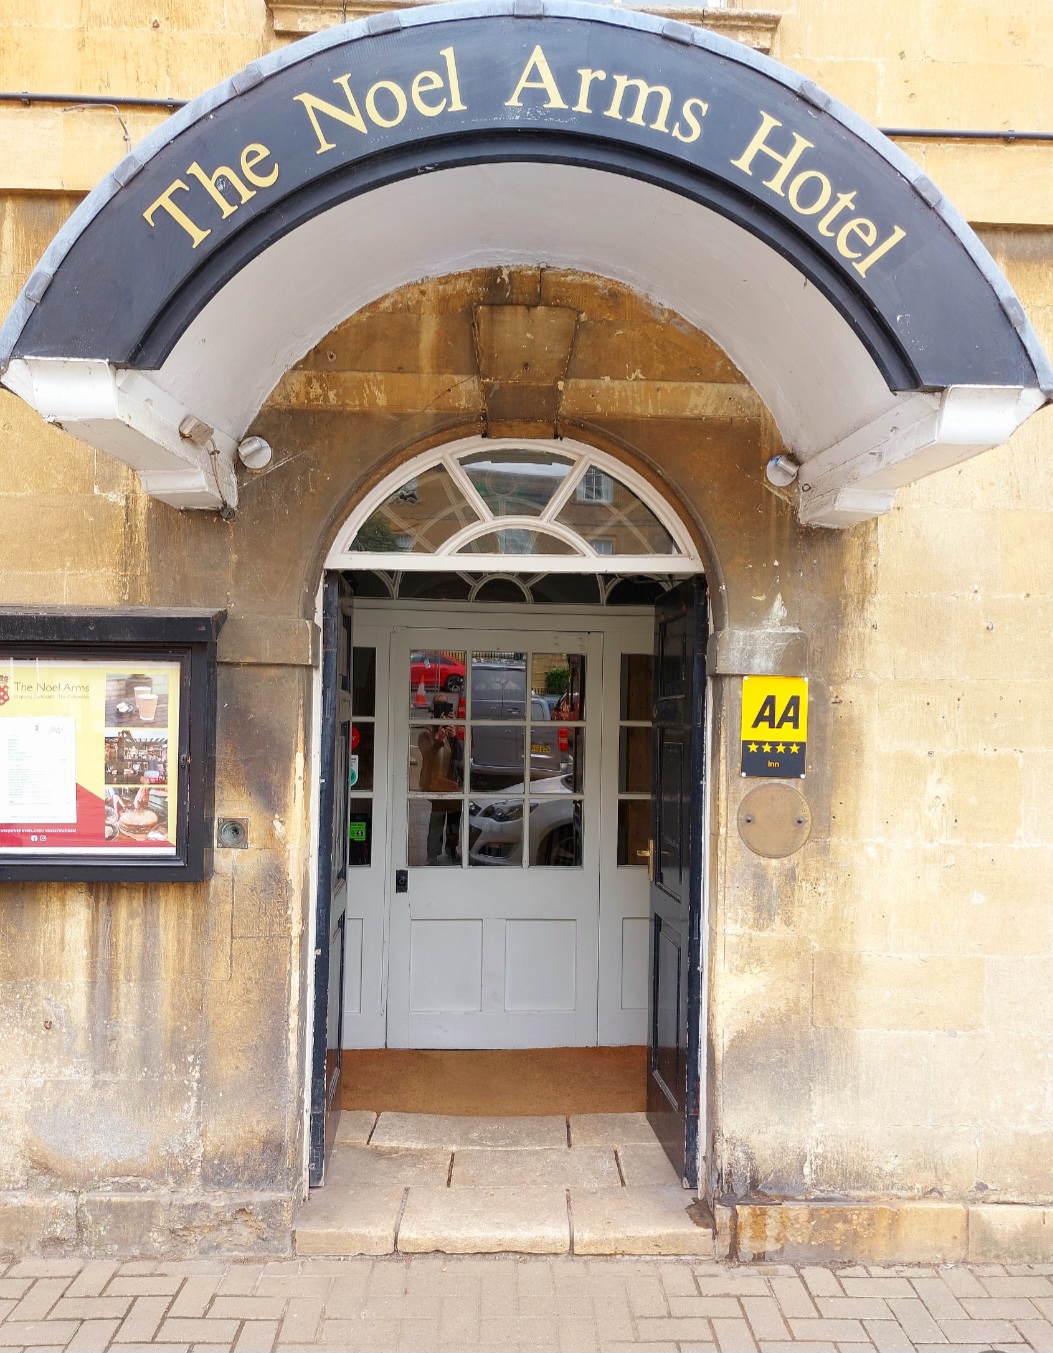 One of the Best pubs in Chipping Campden, the Noel Arms Hotel